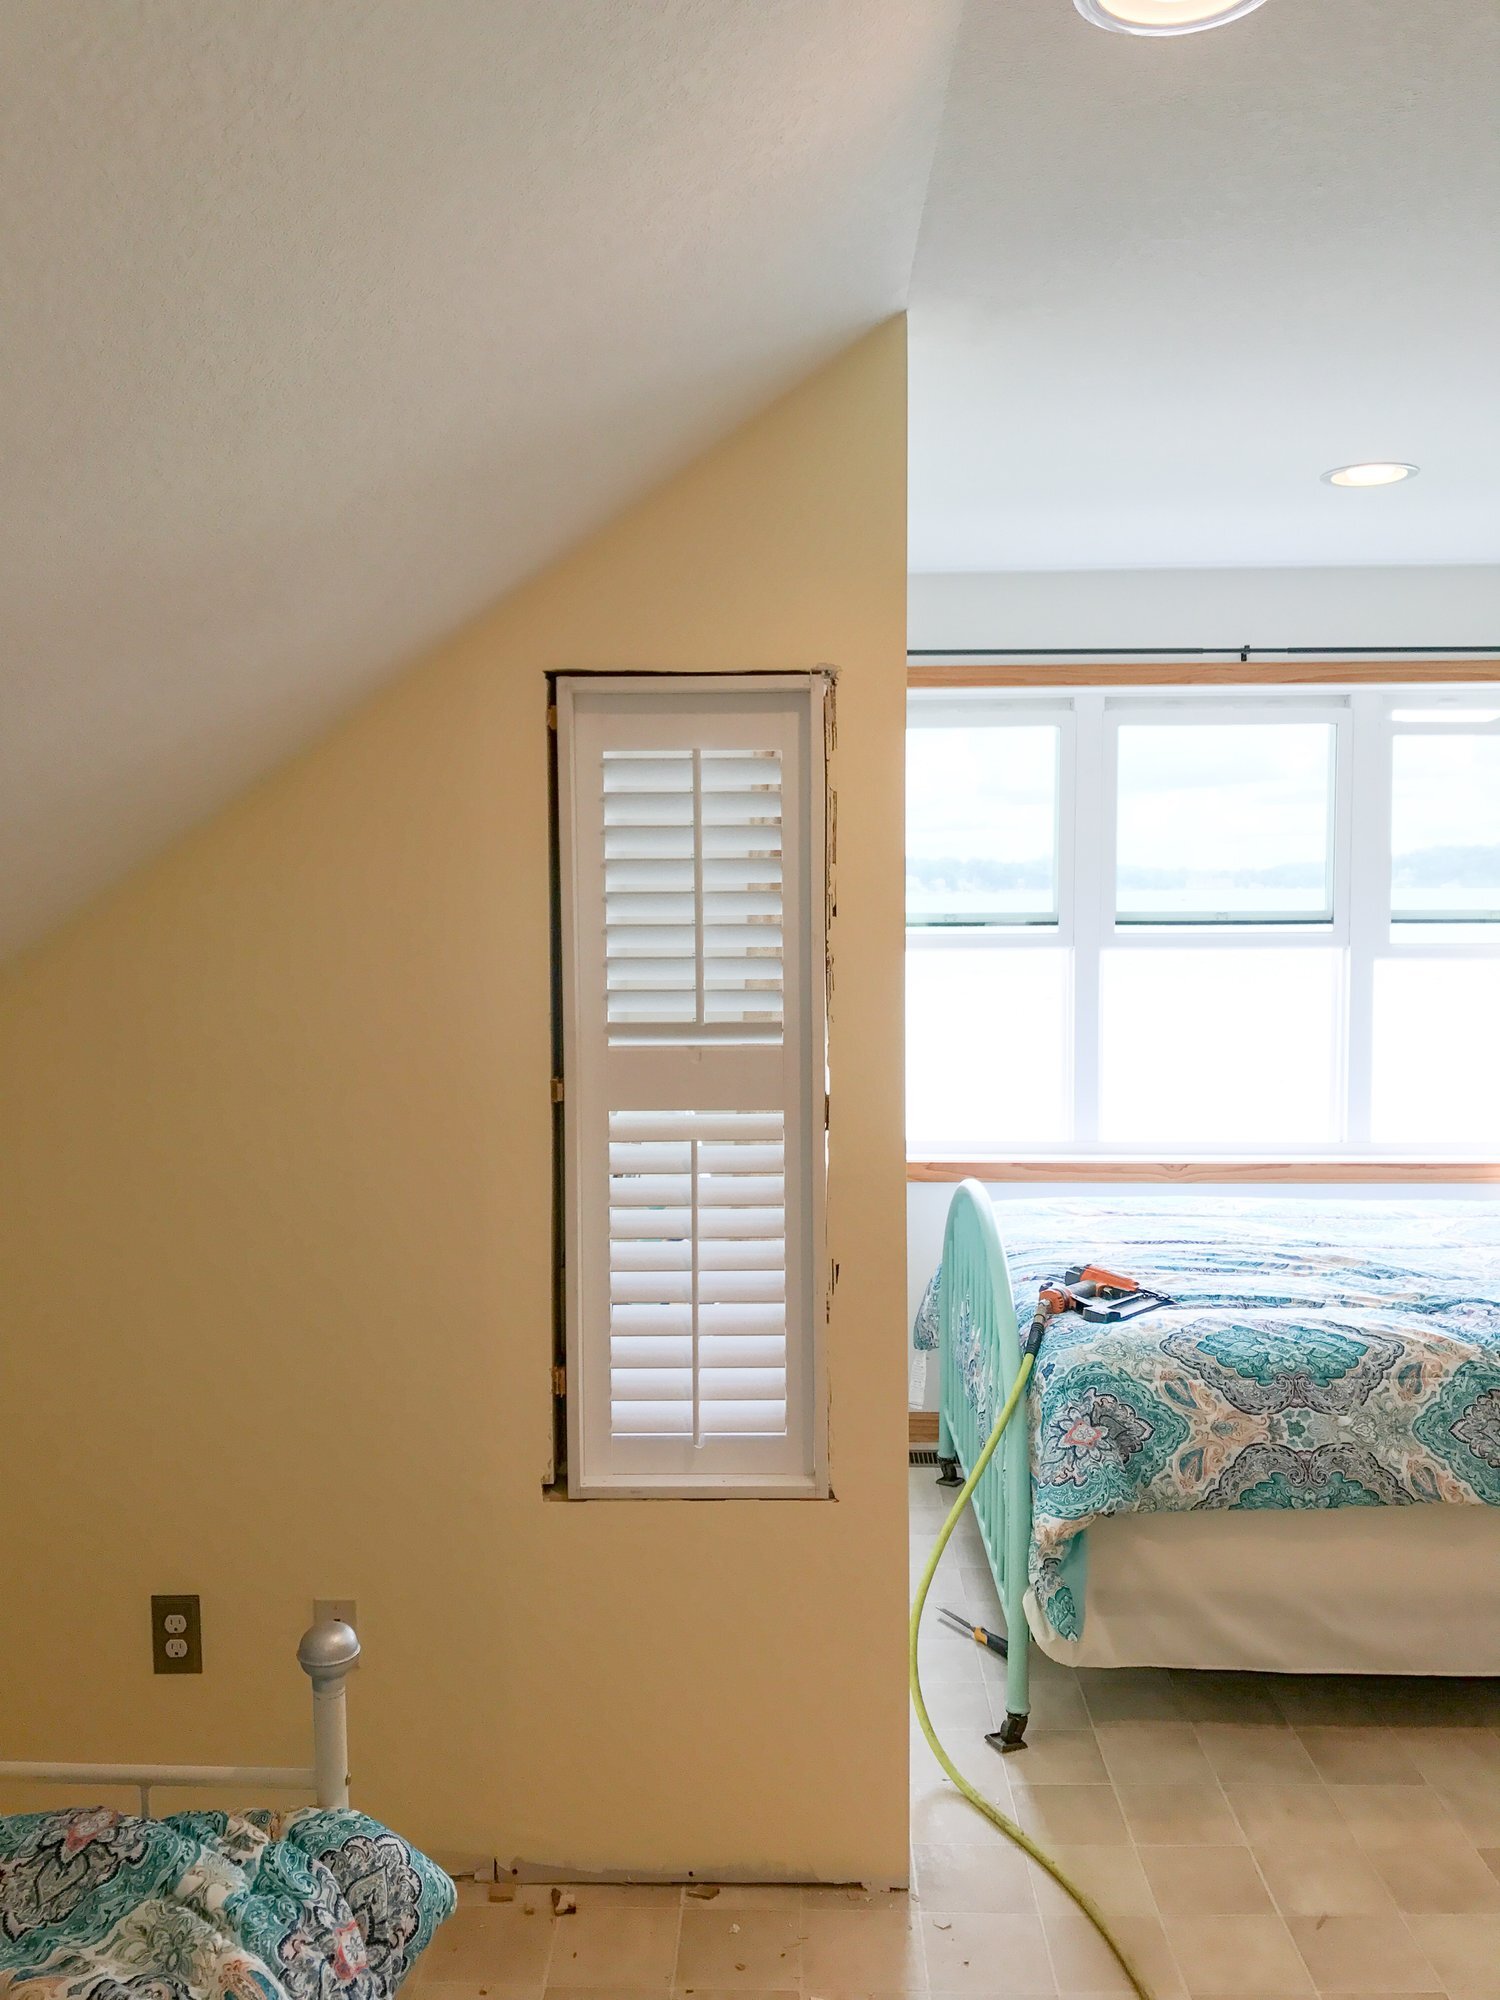 How To Close Off A Loft Space Giving, How To Add Privacy A Loft Bedroom More Privately